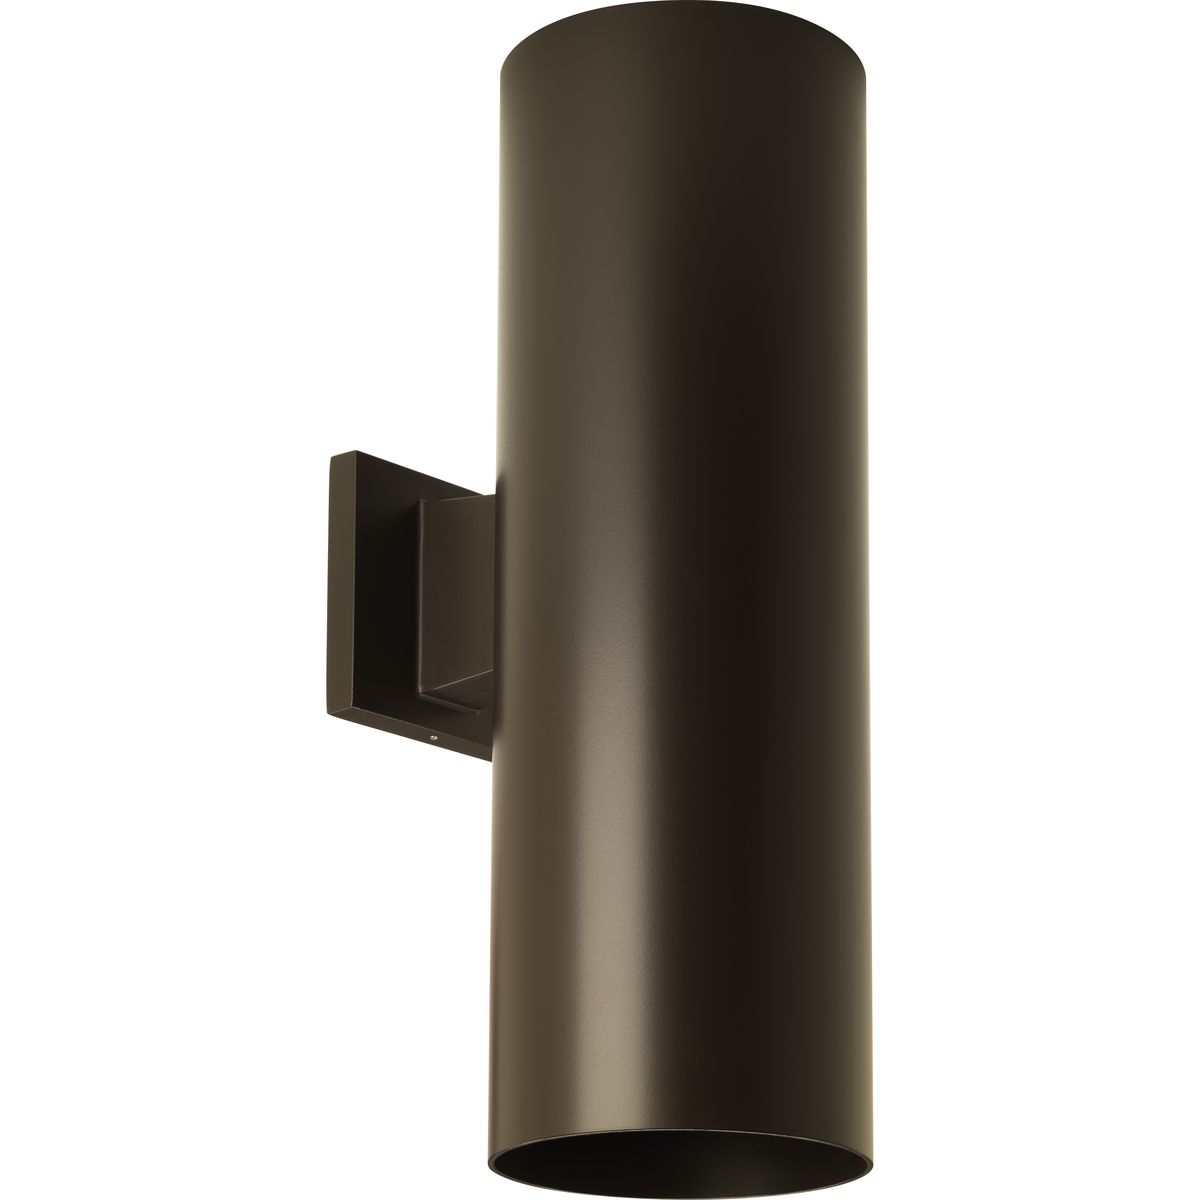 6" Outdoor Up/Down Wall Cylinder - Damp Location Listed - Model P5642-82